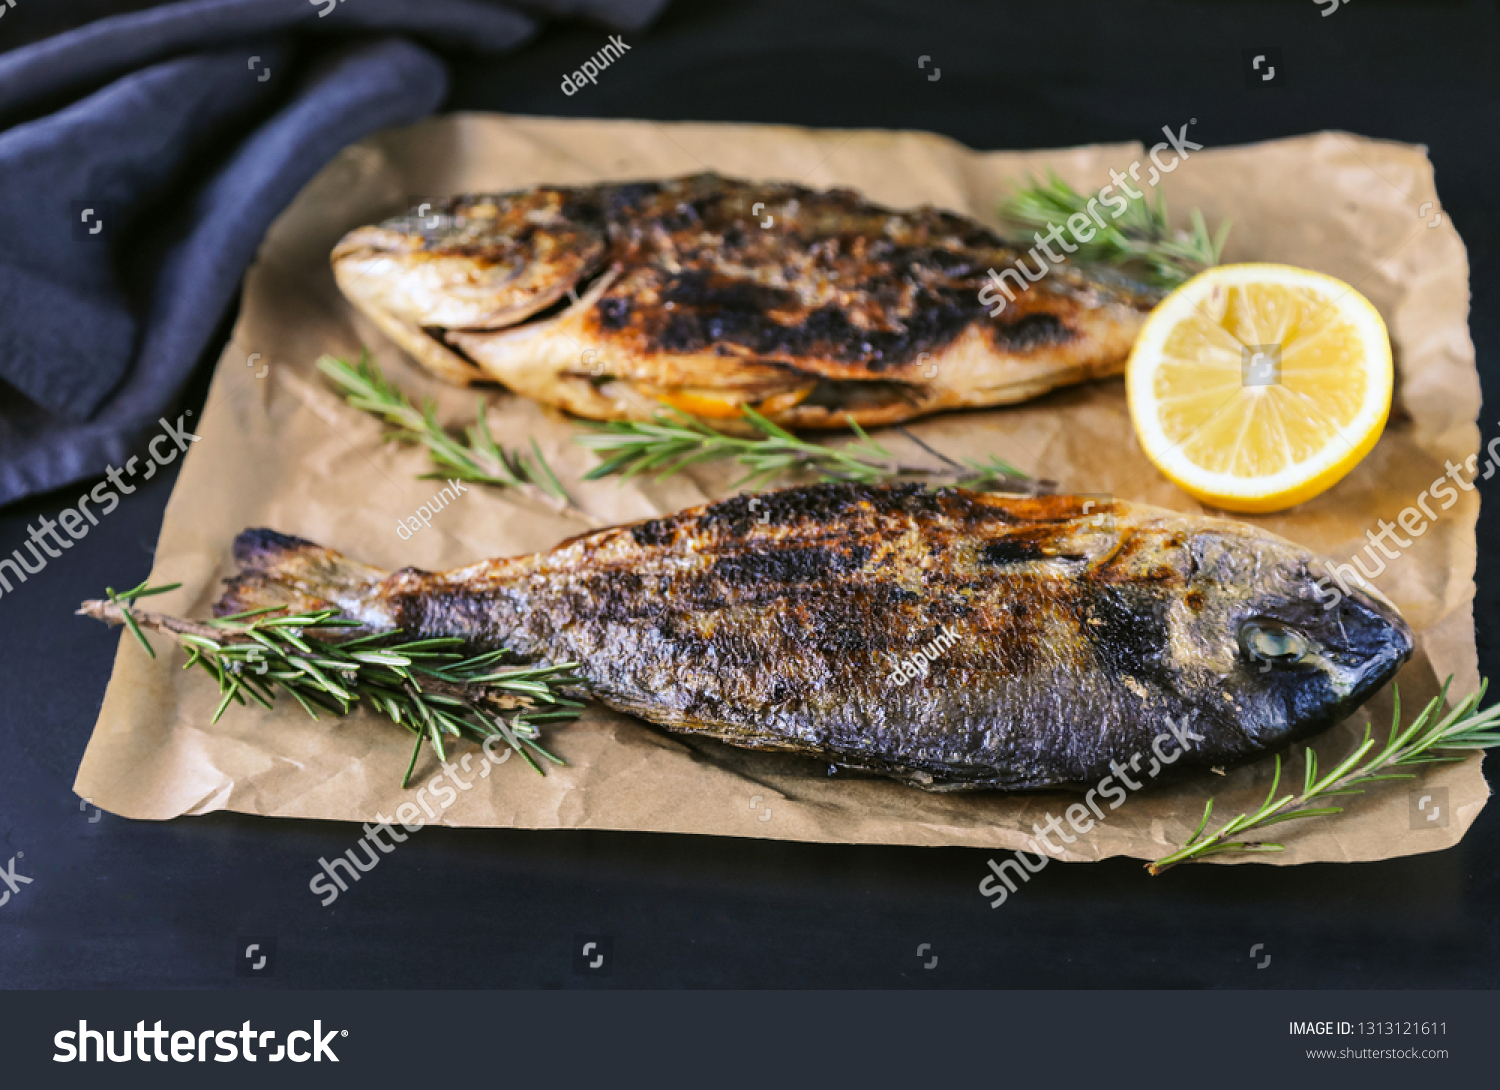 Grilled bream fish with herbs and spices on black background. #1313121611